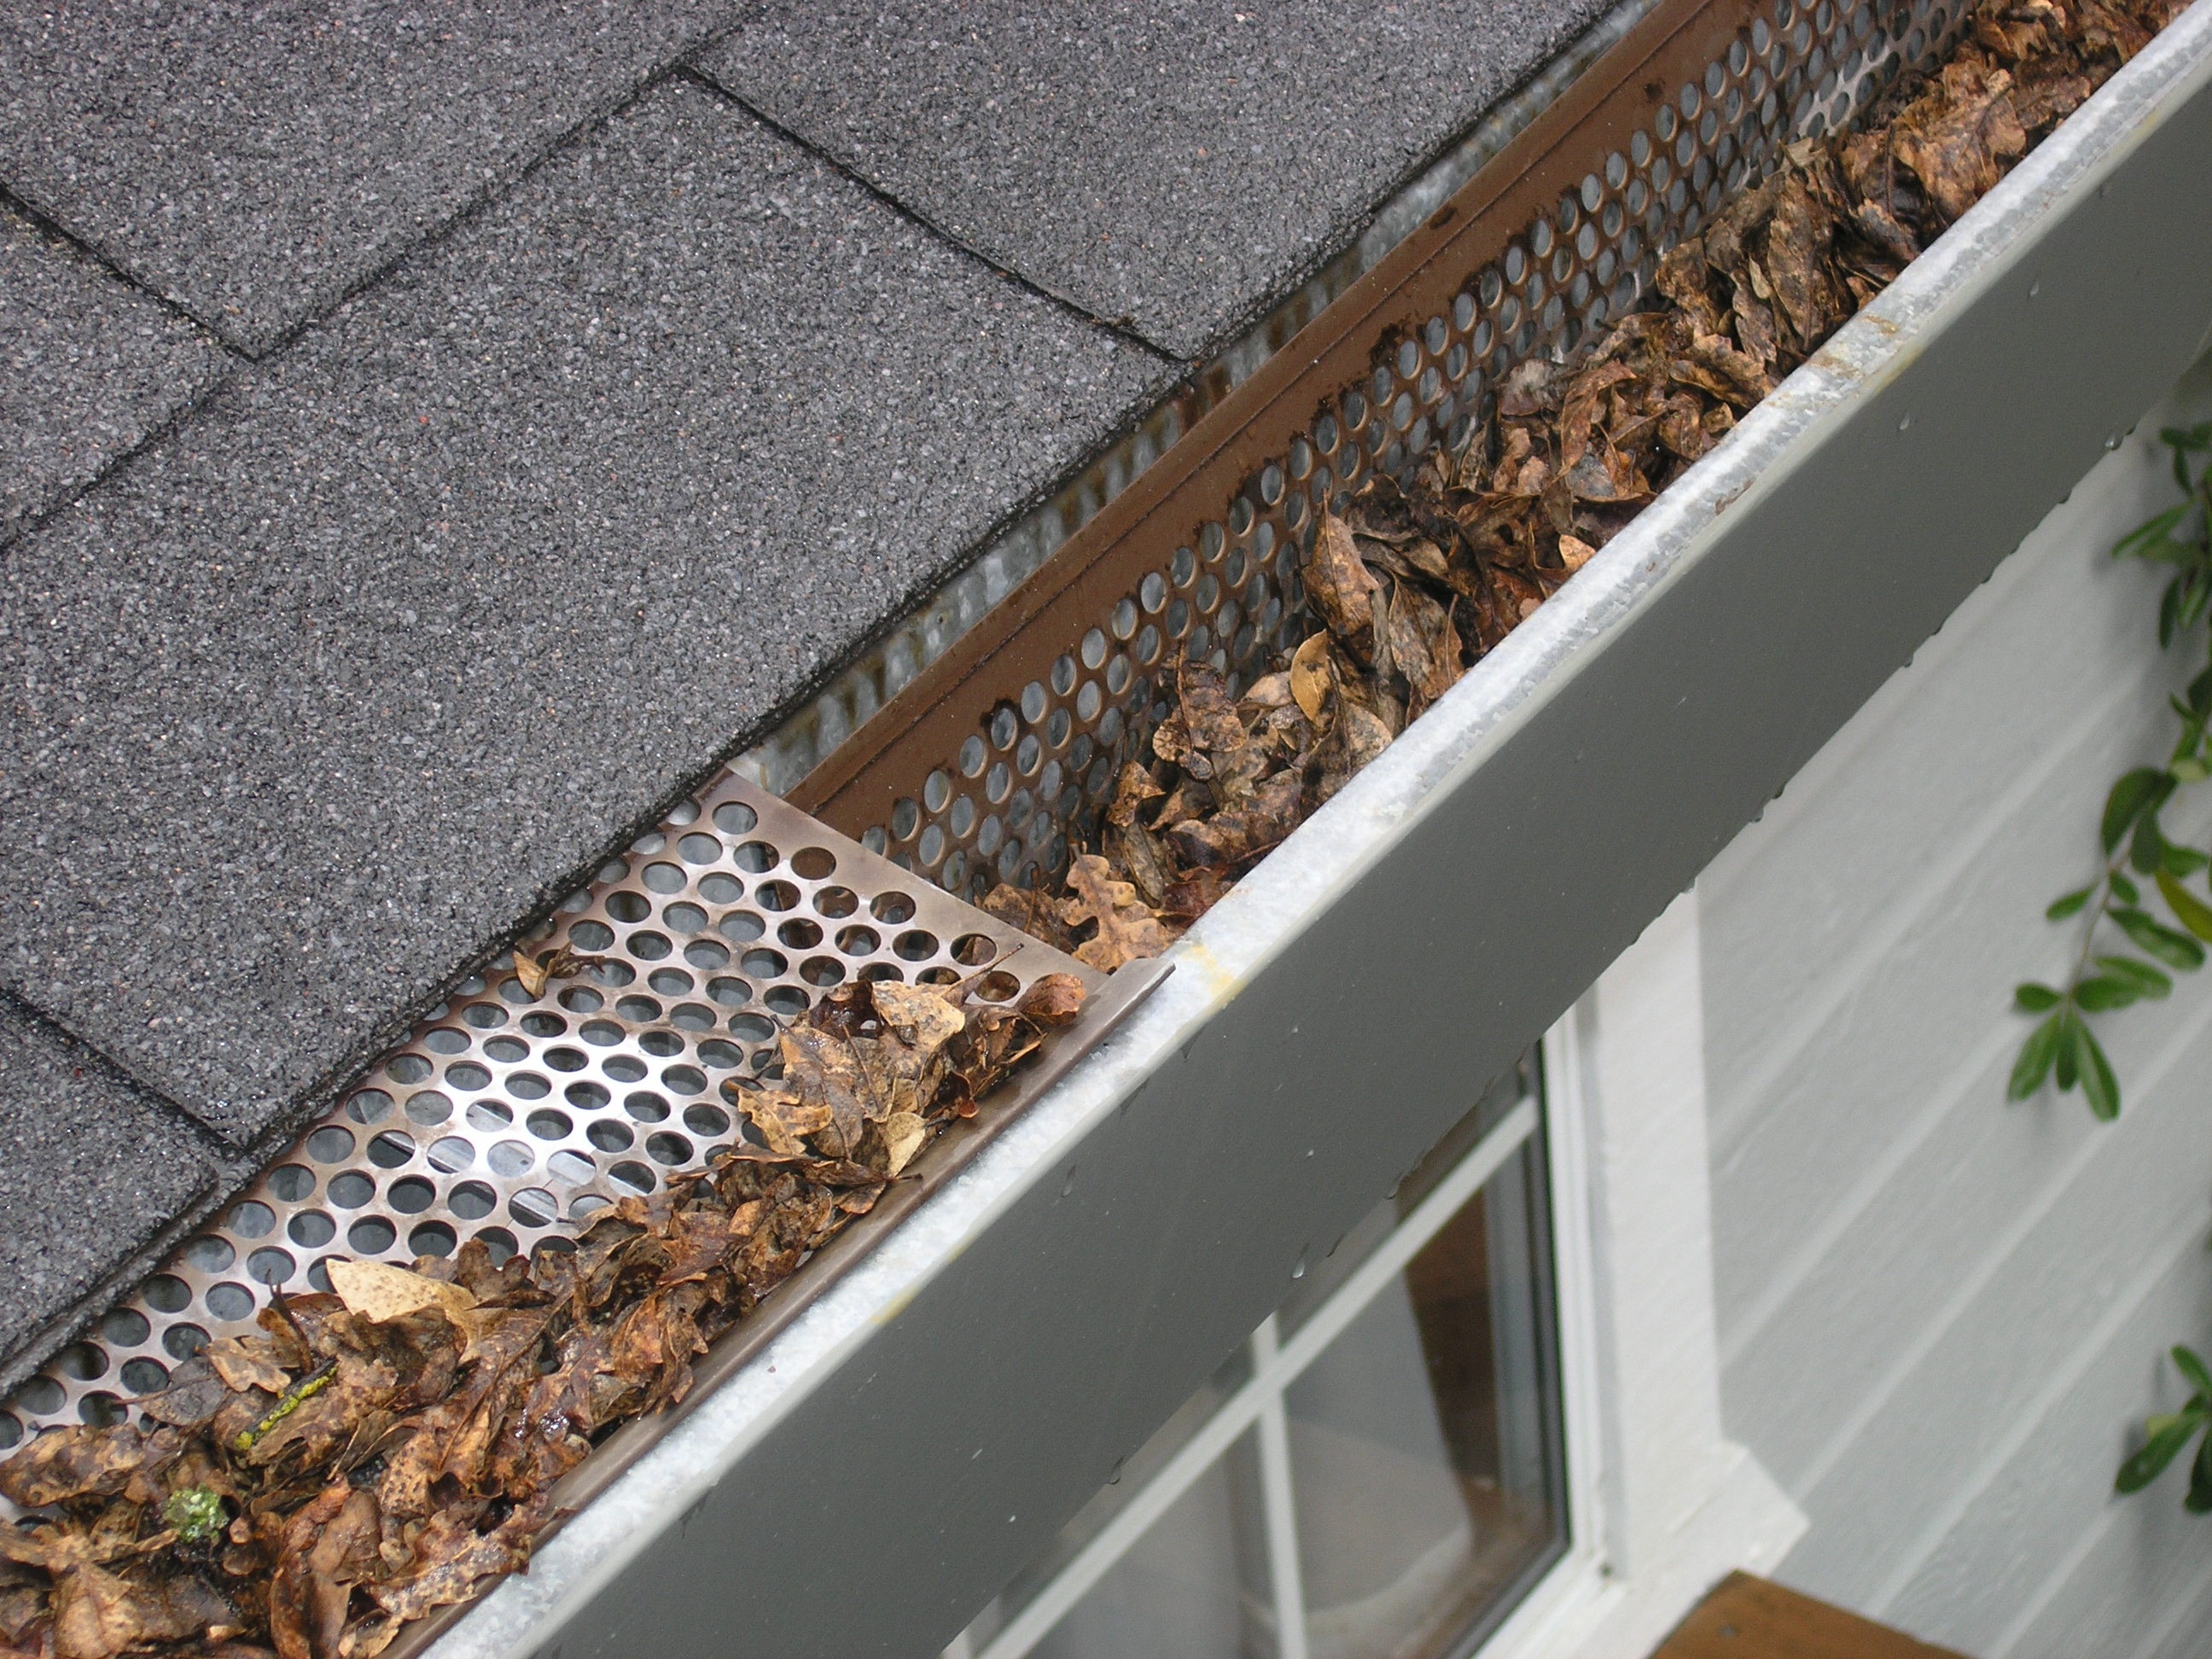 Have your gutters and downpipes cleaned